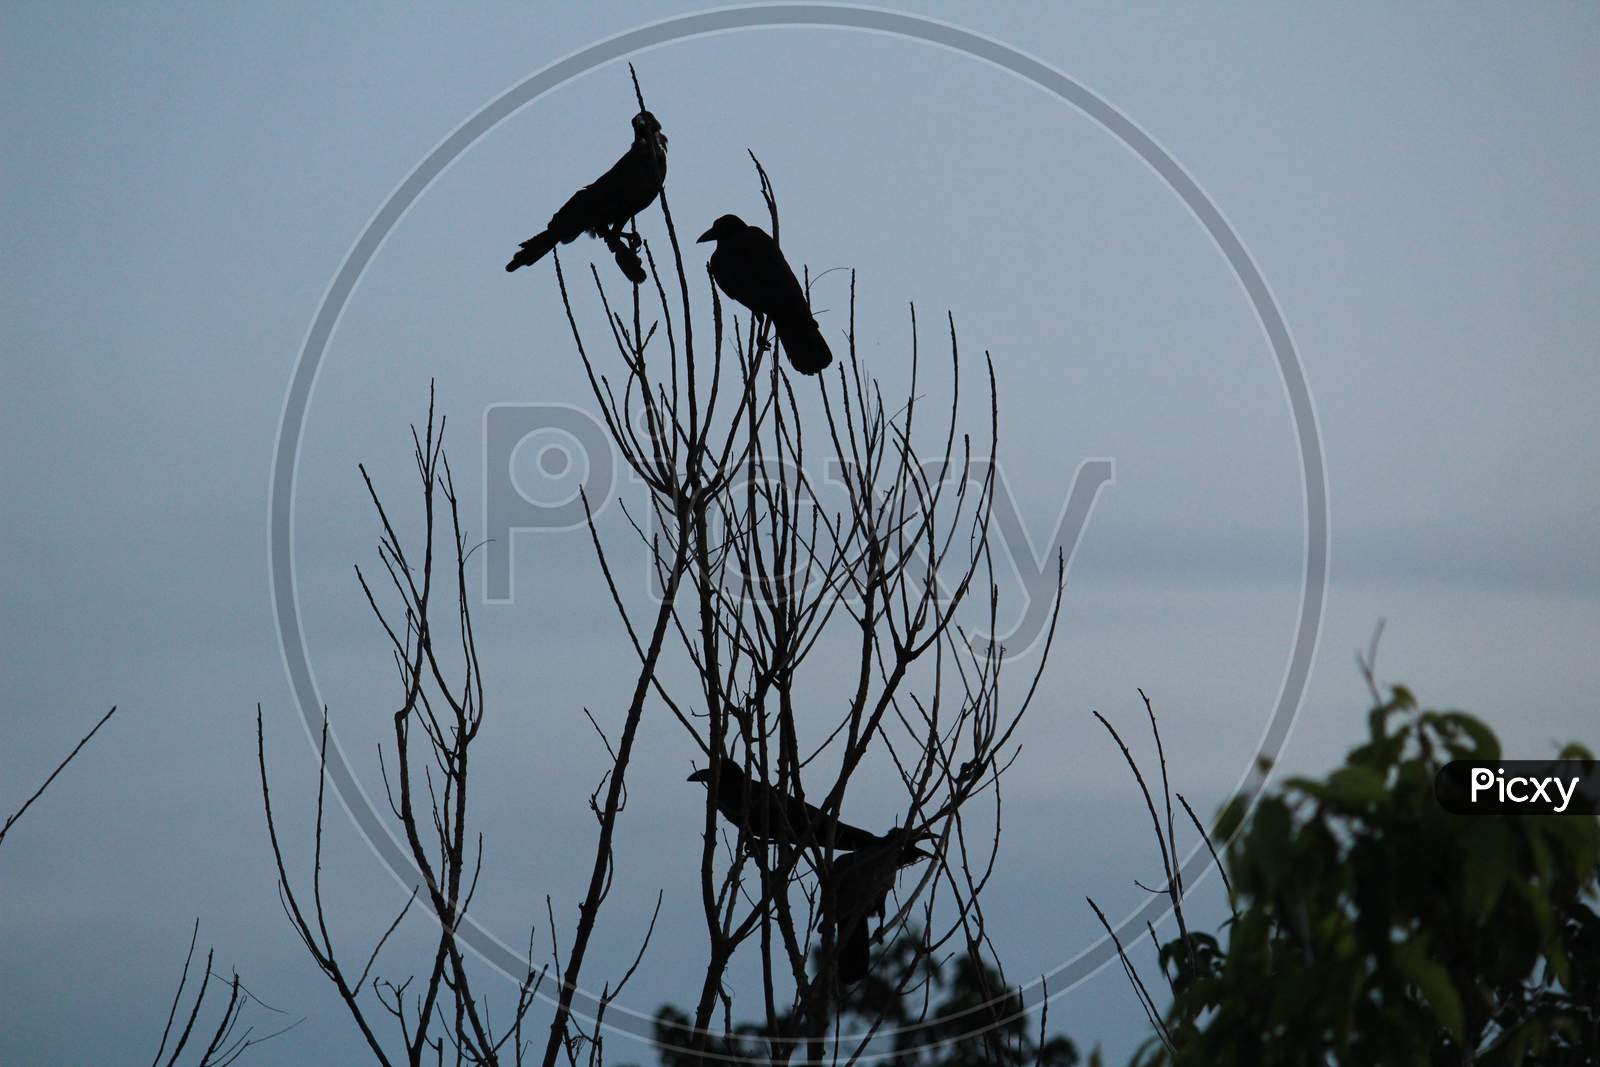 Silhouette Of Crows Sitting On The Tree Branch On The Night With Some Moon Light And It Looks Scary